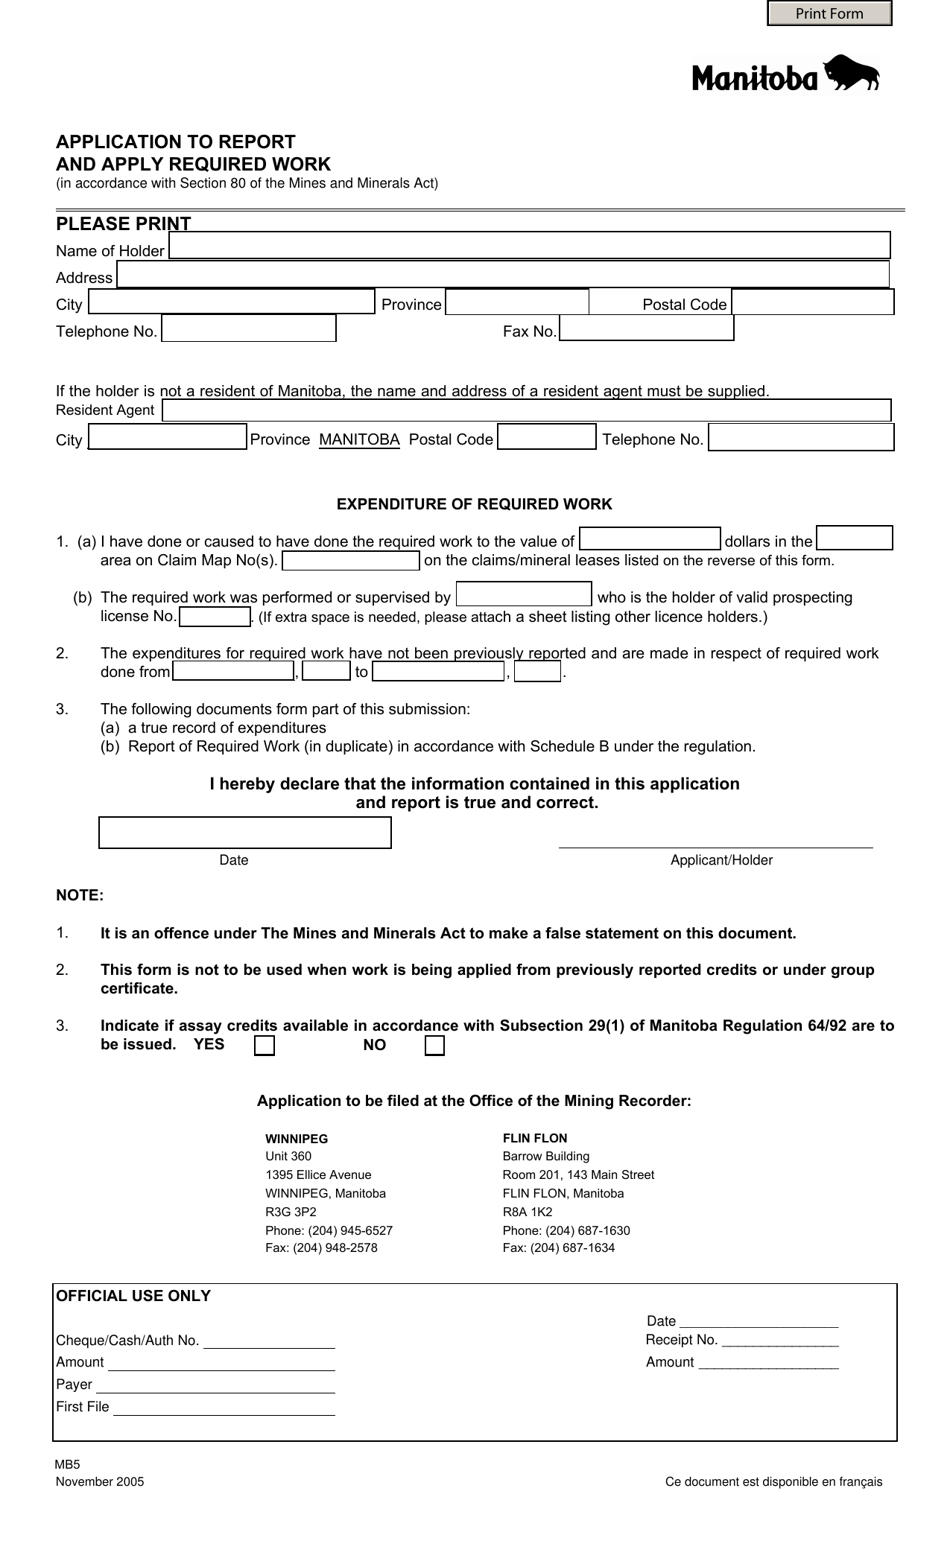 Form MB5 Application to Report and Apply Required Work - Manitoba, Canada, Page 1